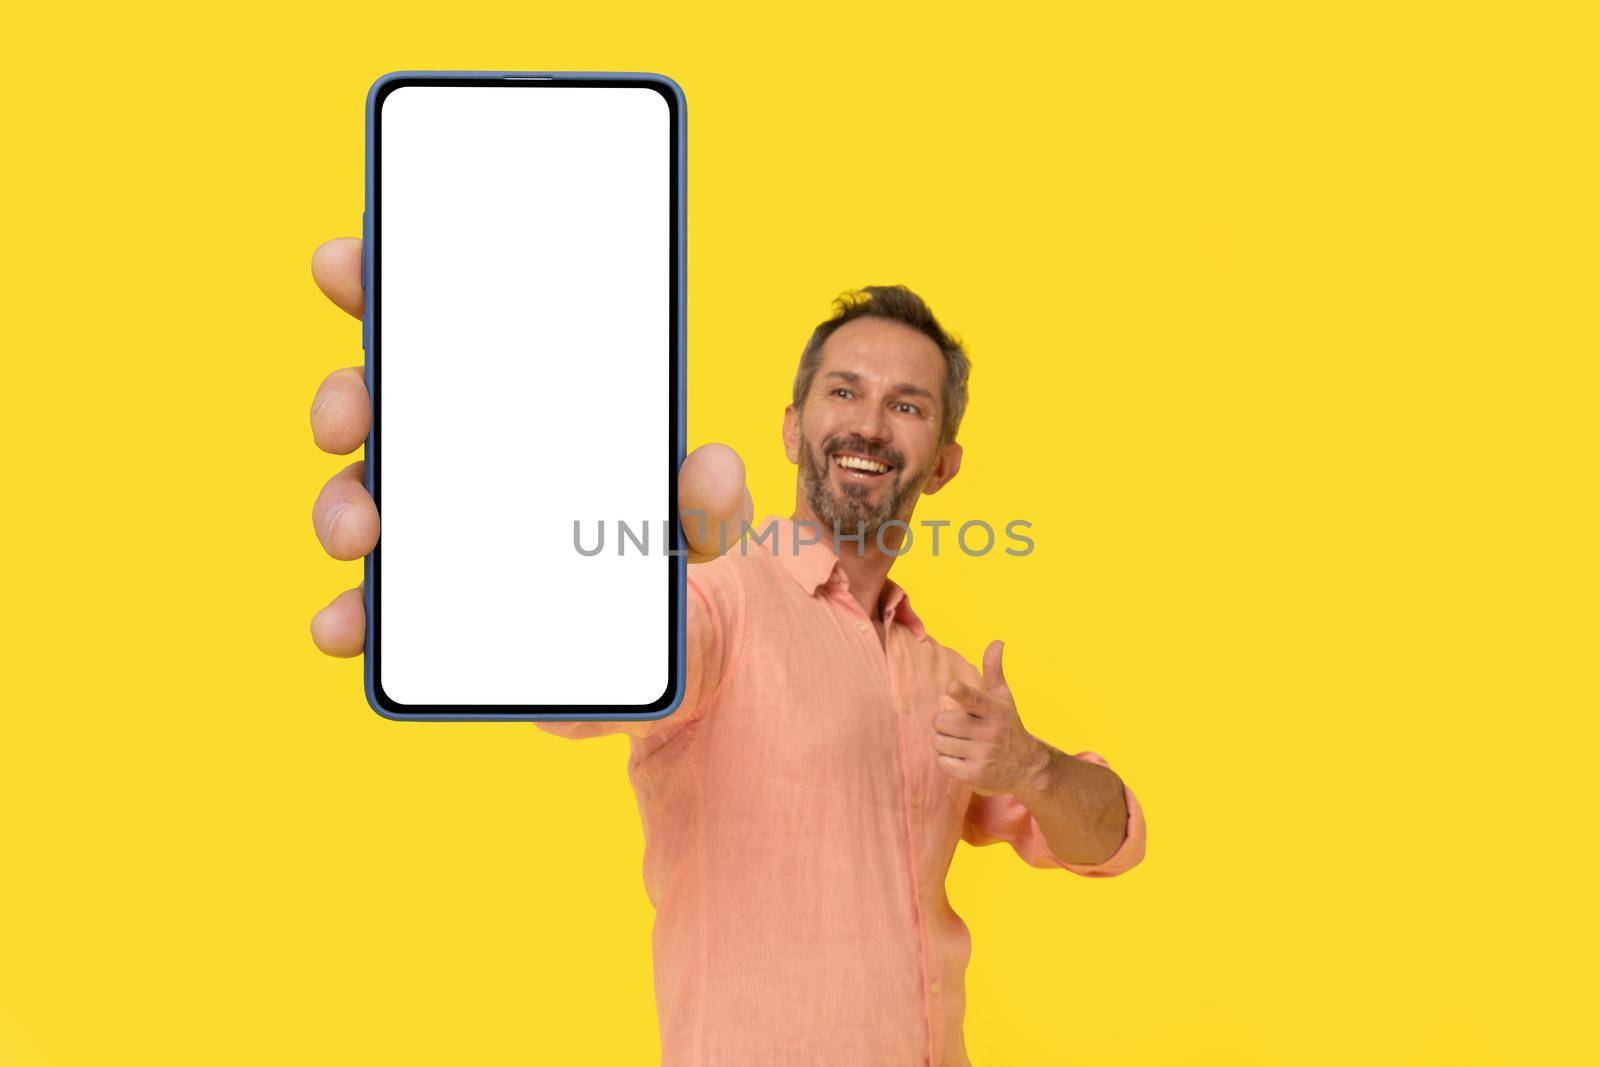 Middle aged grey haired man pointing at smartphone in hand amazed smiling looking at smartphone wearing peach shirt isolated on yellow. Mature fit man with phone, mobile app advertisement.